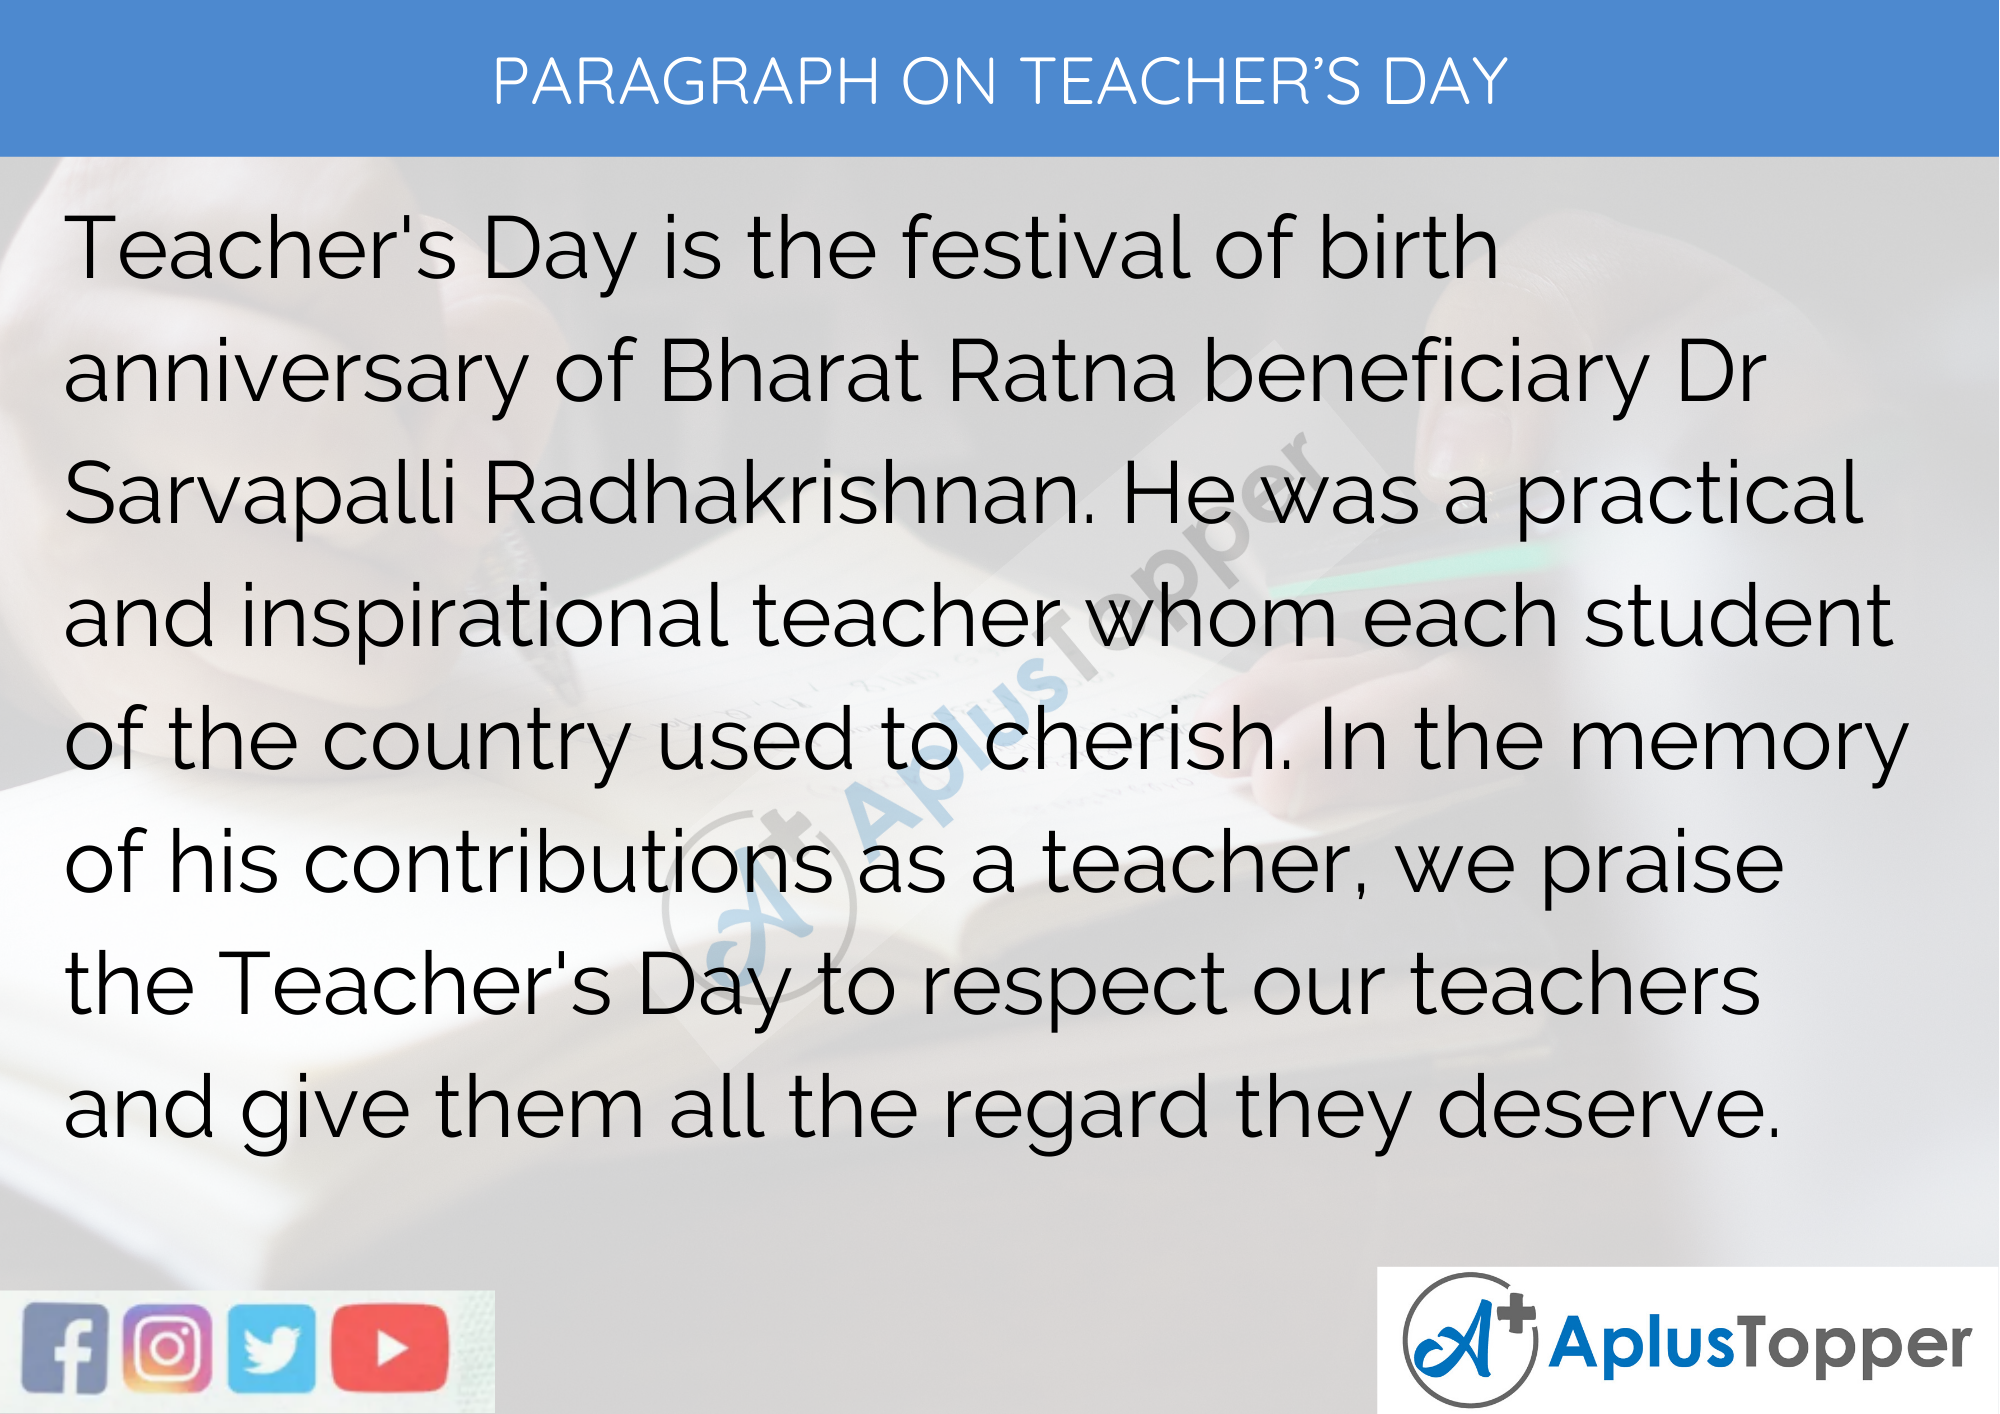 Paragraph On Teacher’s Day - 250 to 300 Words for Classes 9, 10, 11, 12 and Competitive Exams Students